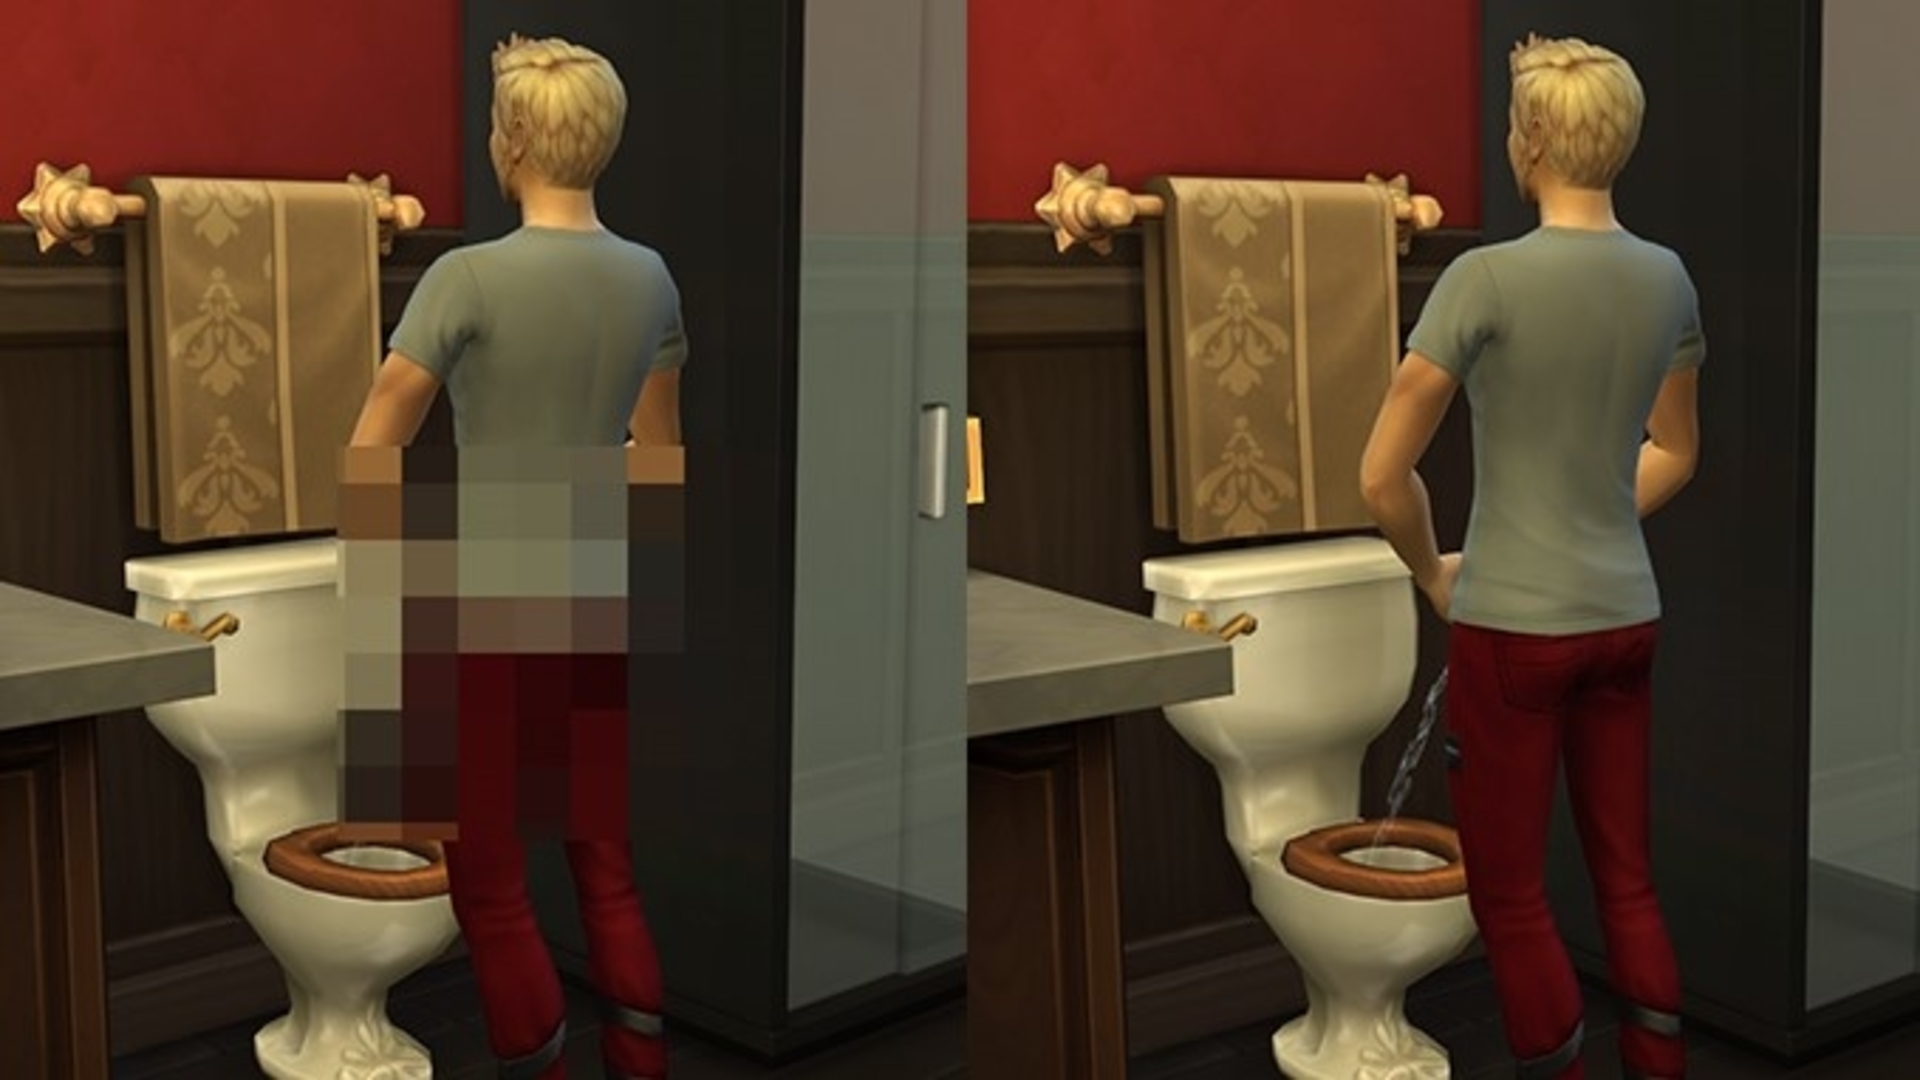 the sims 4 mods downloads